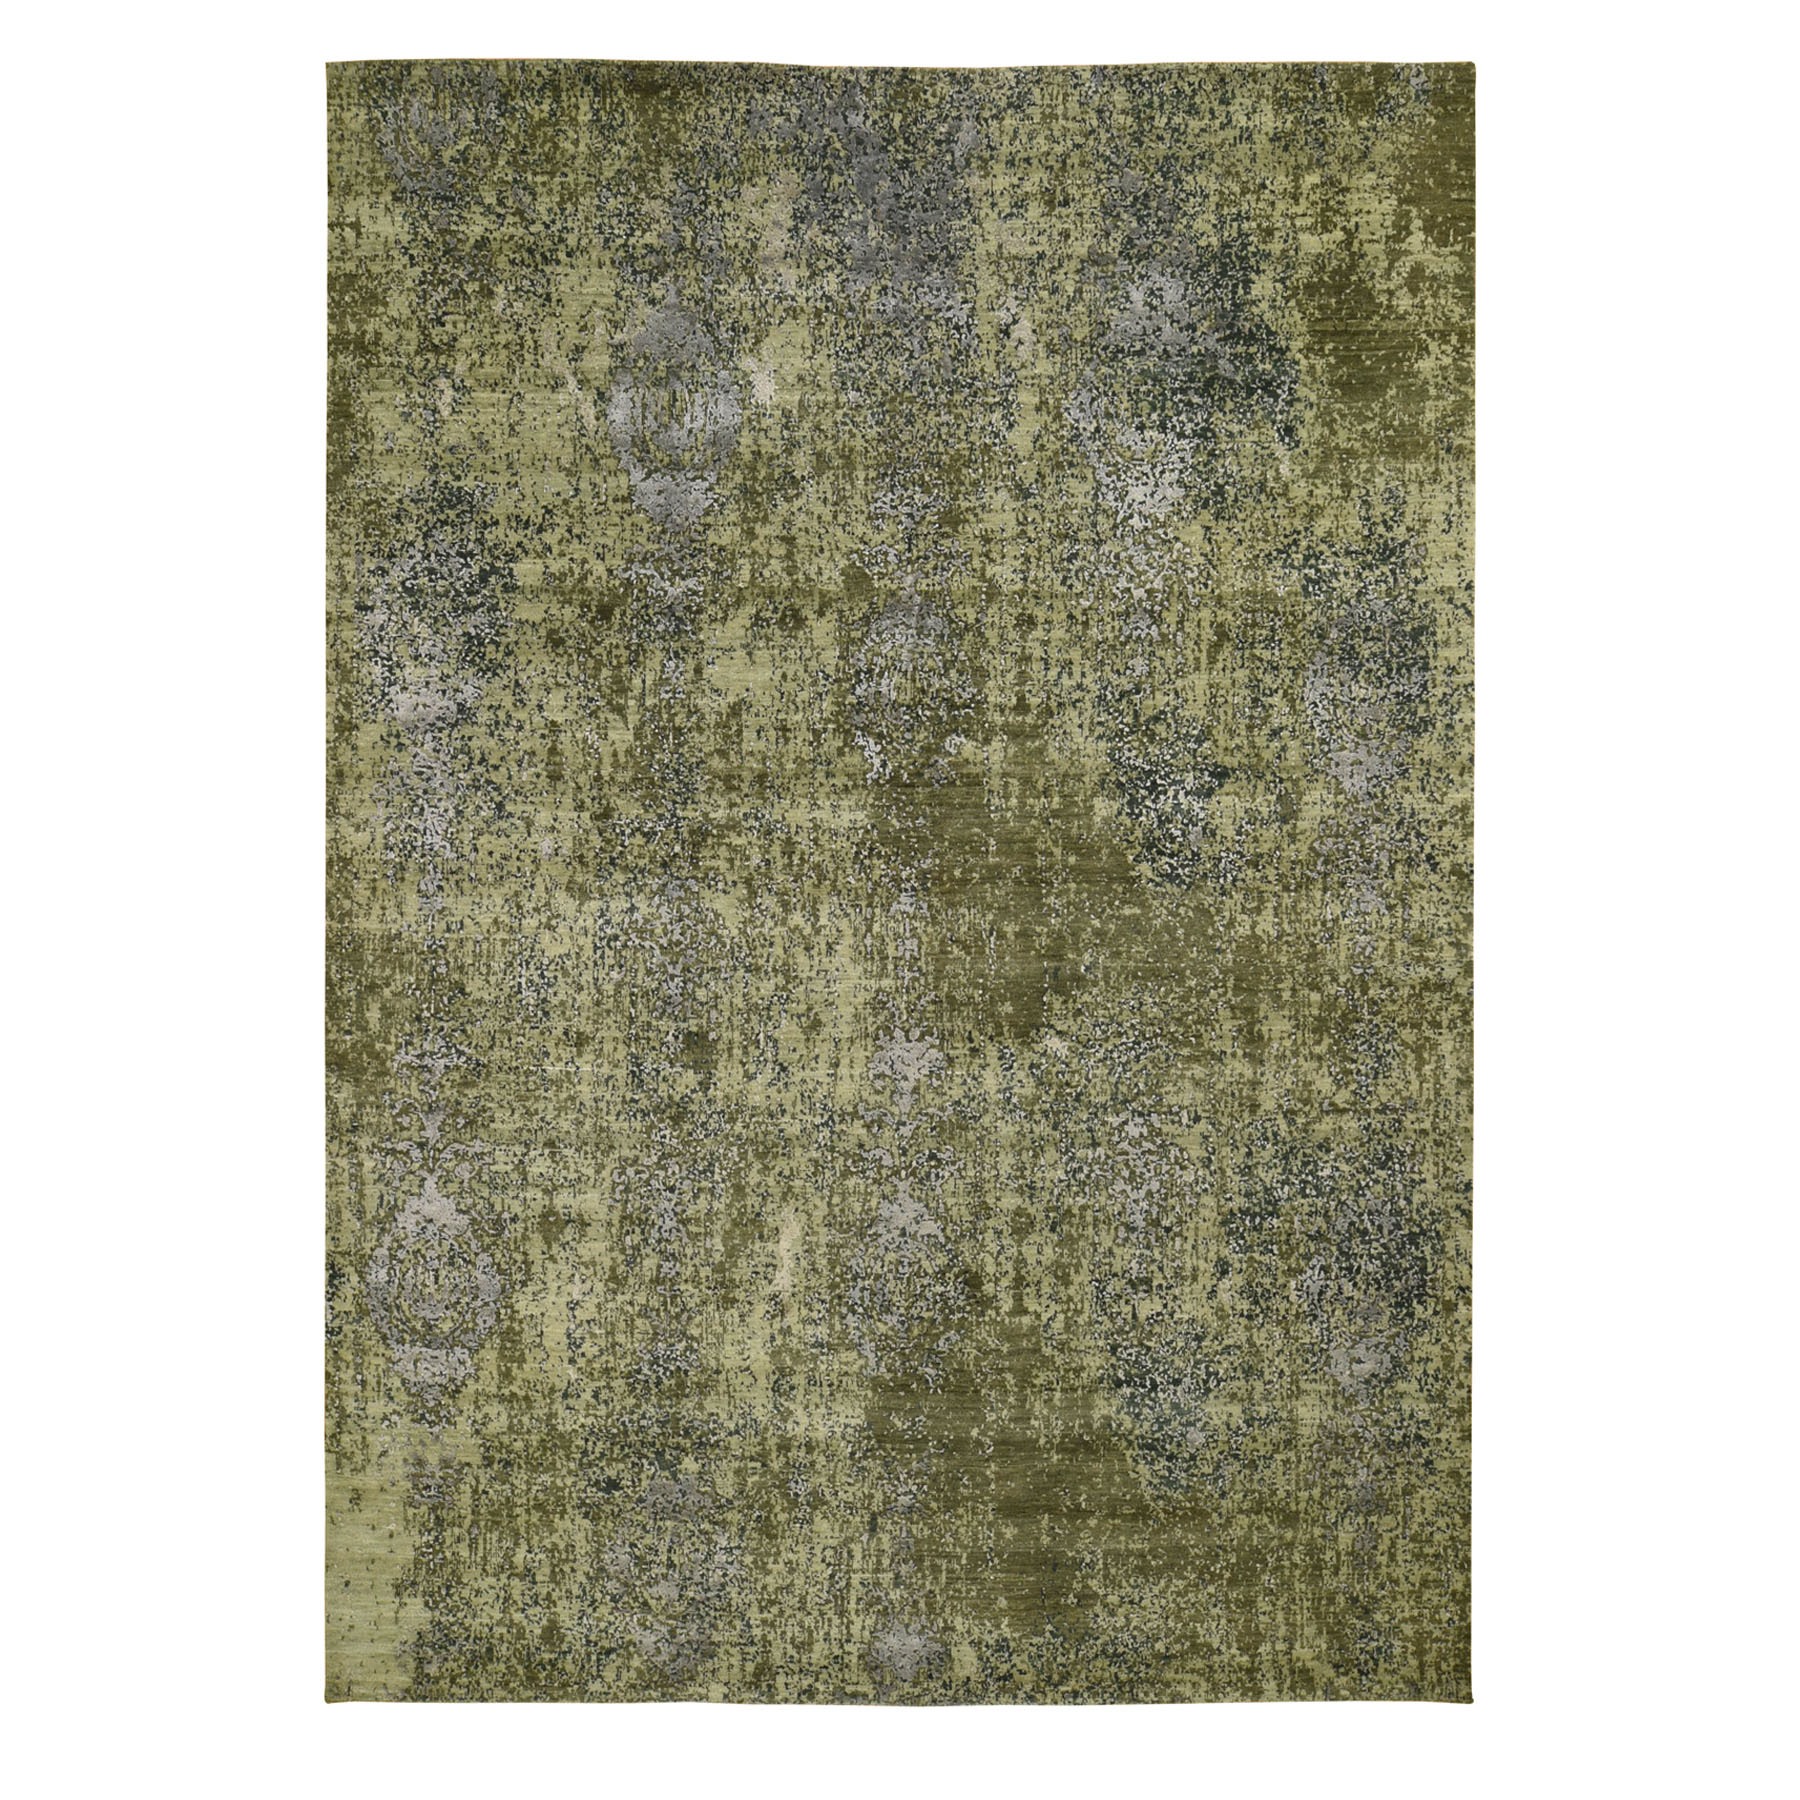 9'1"x12' The Greens, Pure Silk With Textured Wool Hand Woven Oriental Rug 